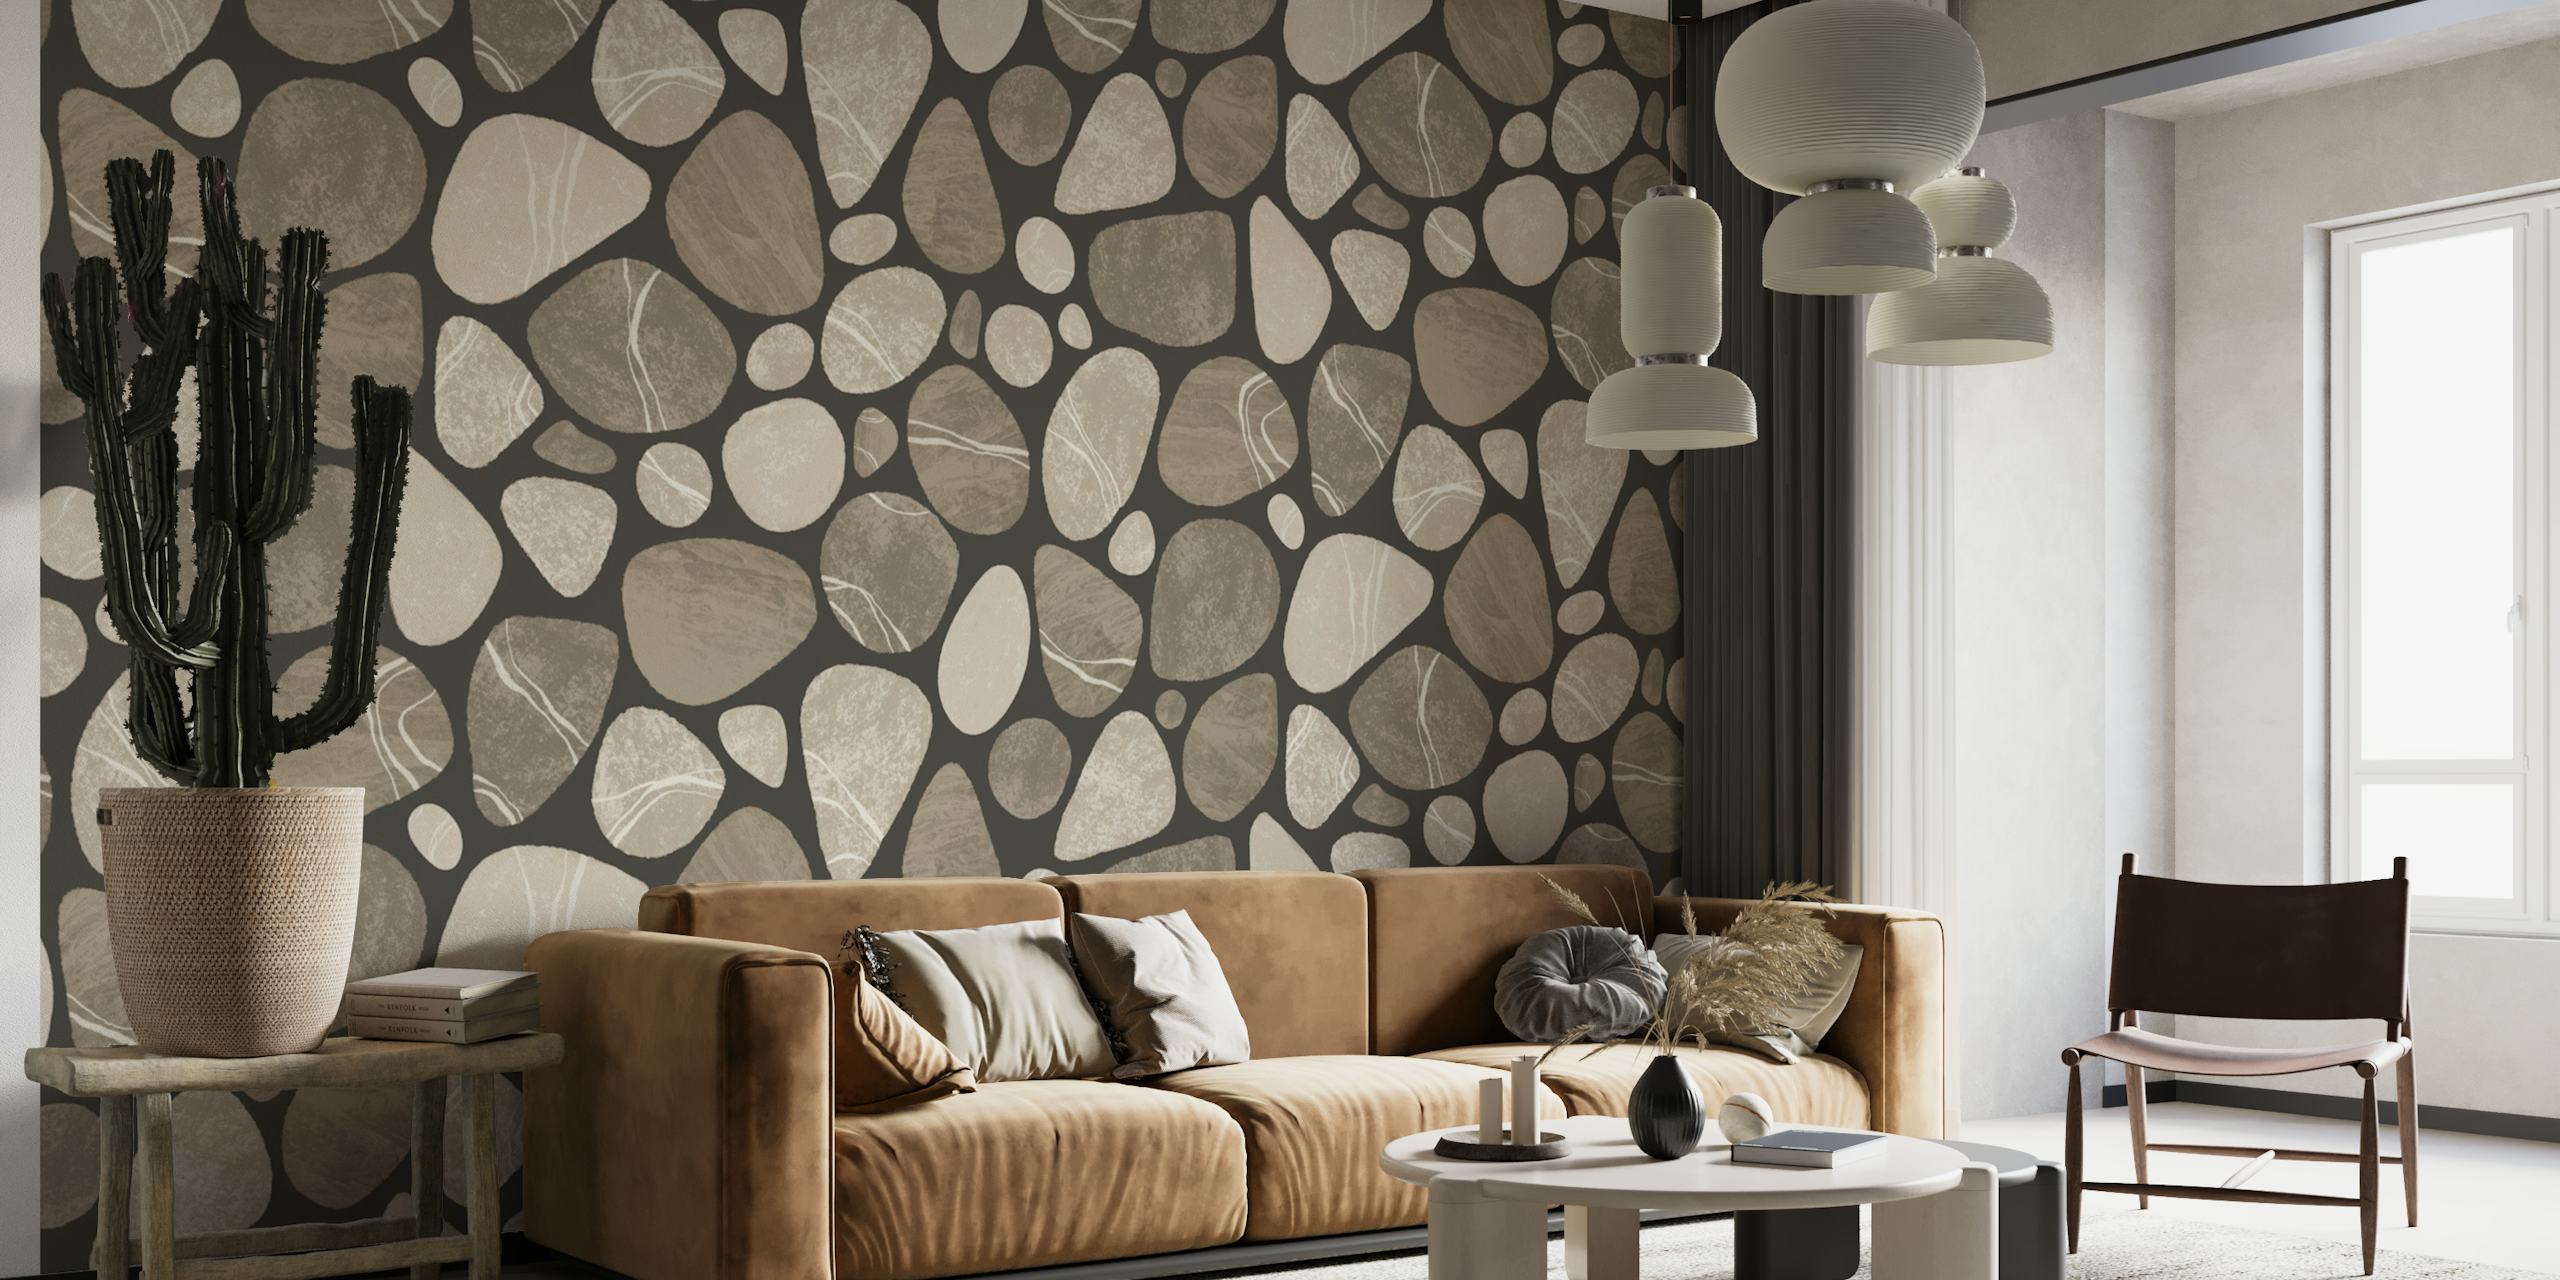 Pebble Serenity Stone Pattern Beauty Of Nature In Neutral Brown Beige Colors behang